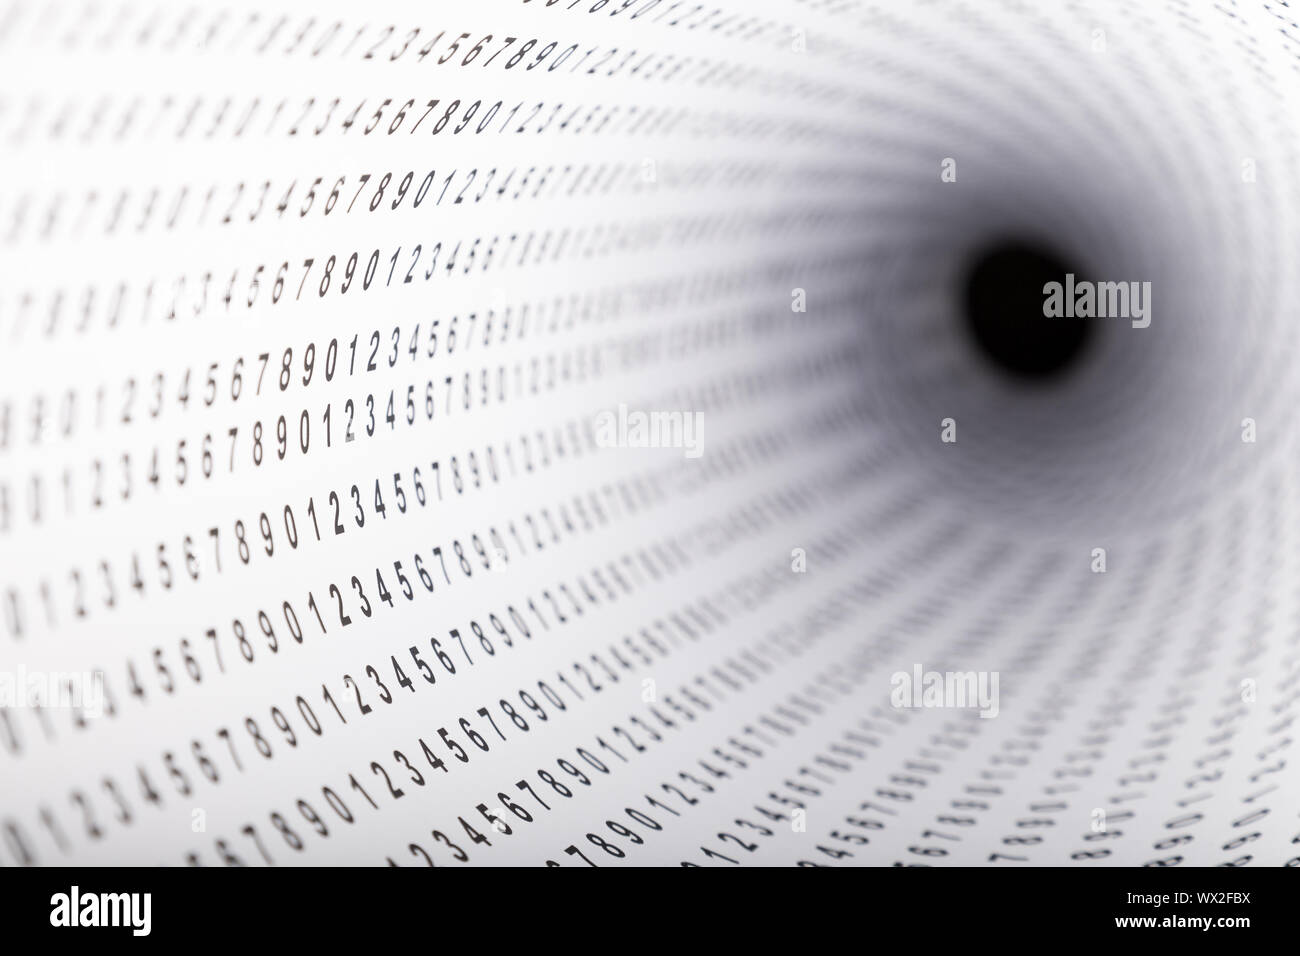 Paper with digits showing photo with shallow depth. Nr 2 of 3 photo's with diaphragm F11 Stock Photo